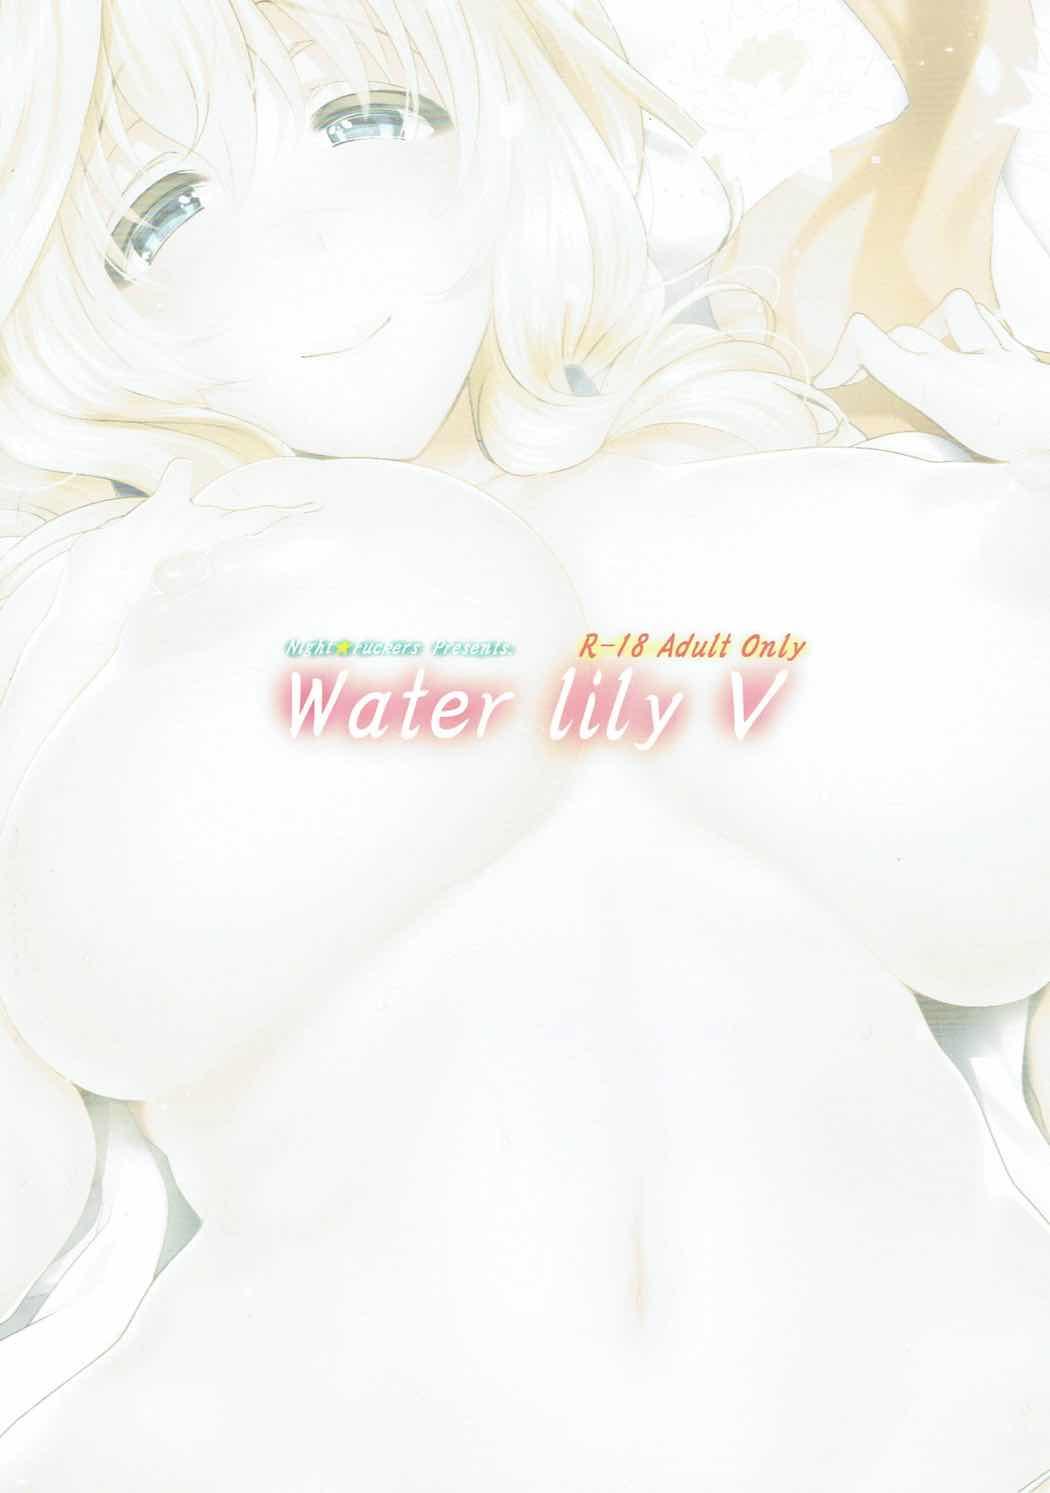 Water lily V 39